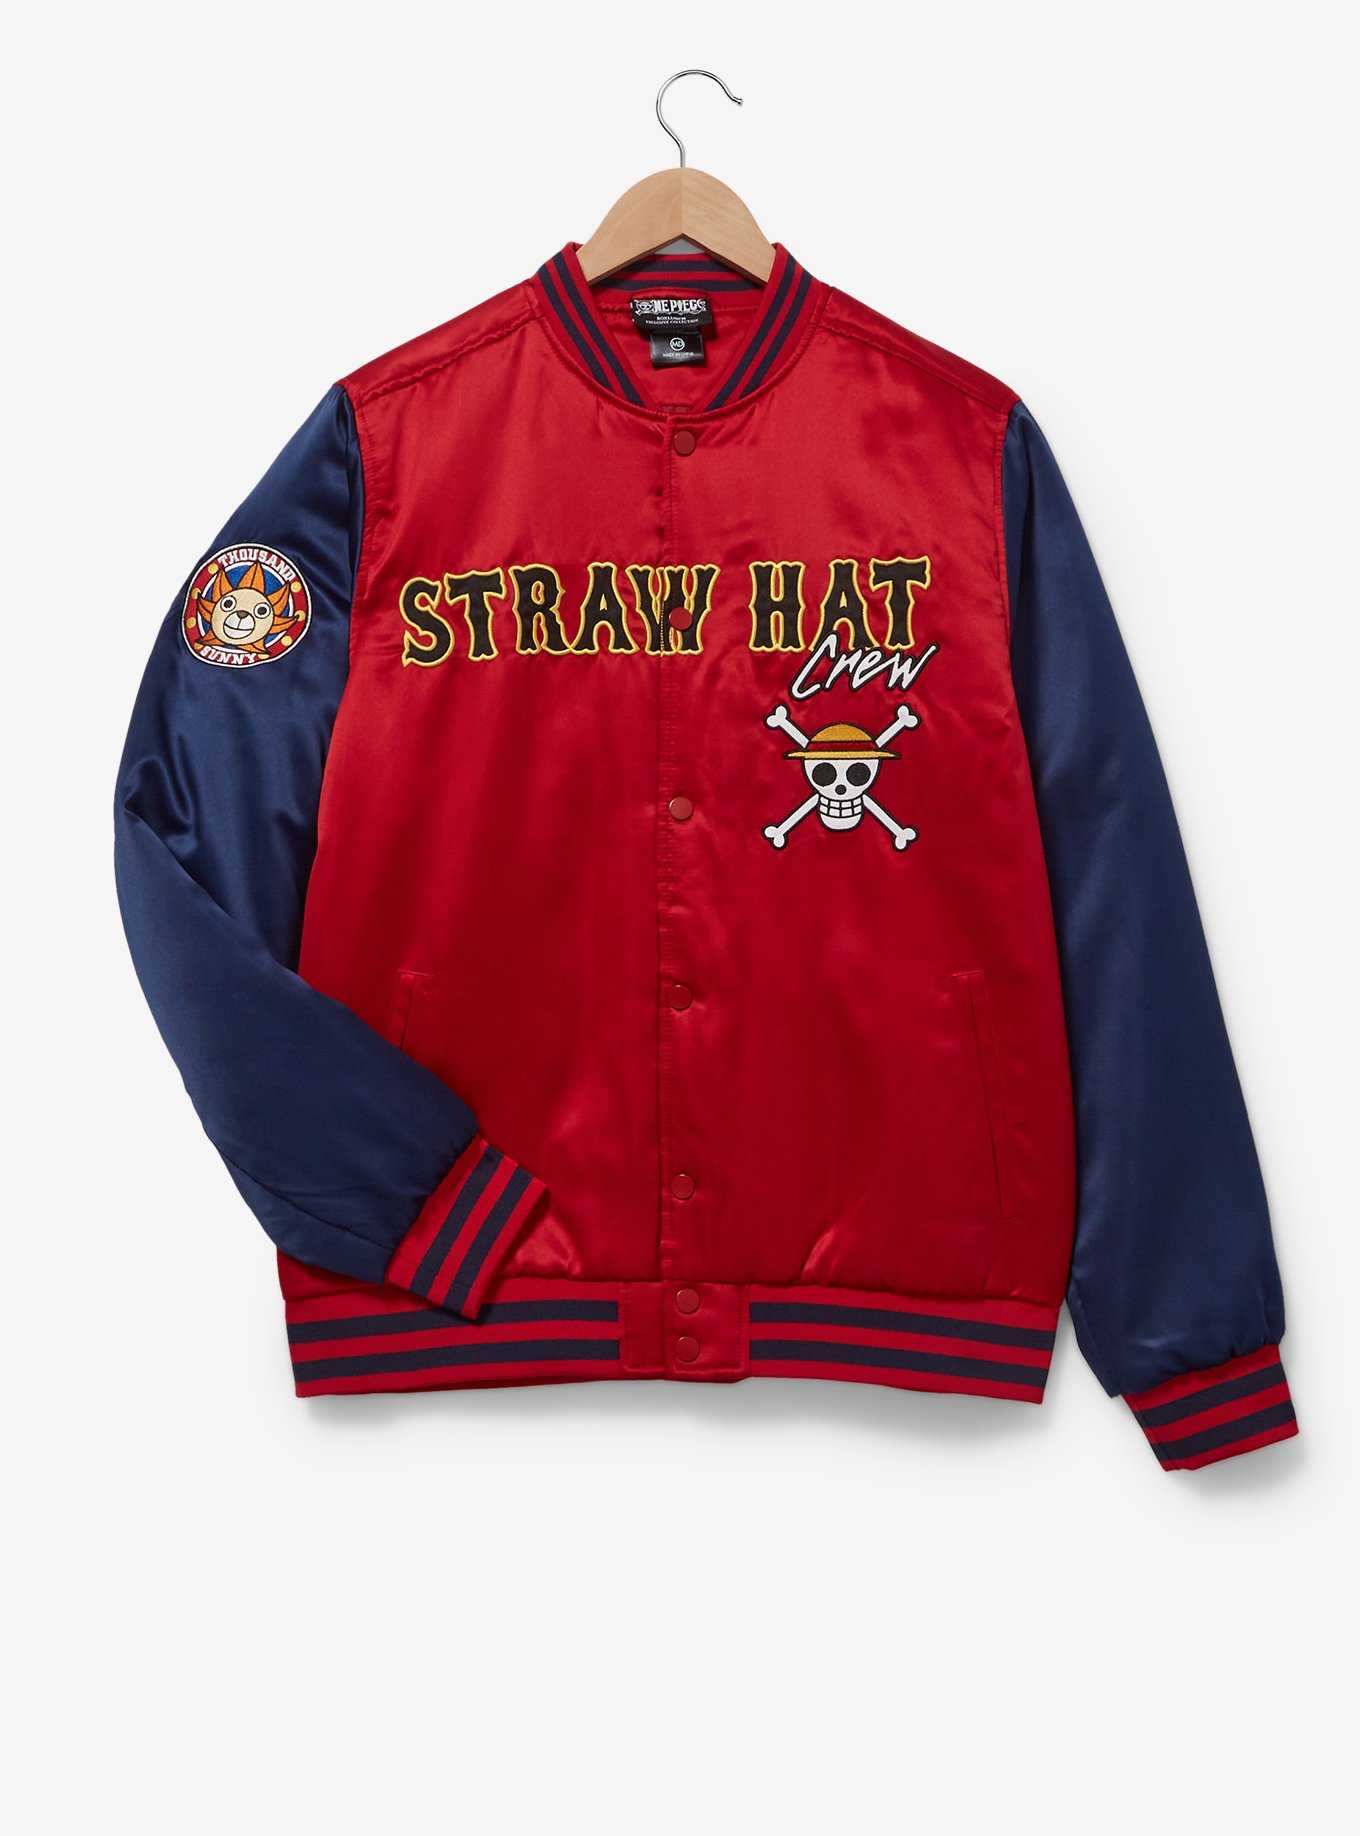 One Piece Straw Hat Crew Bomber Jacket - BoxLunch Exclusive, , hi-res